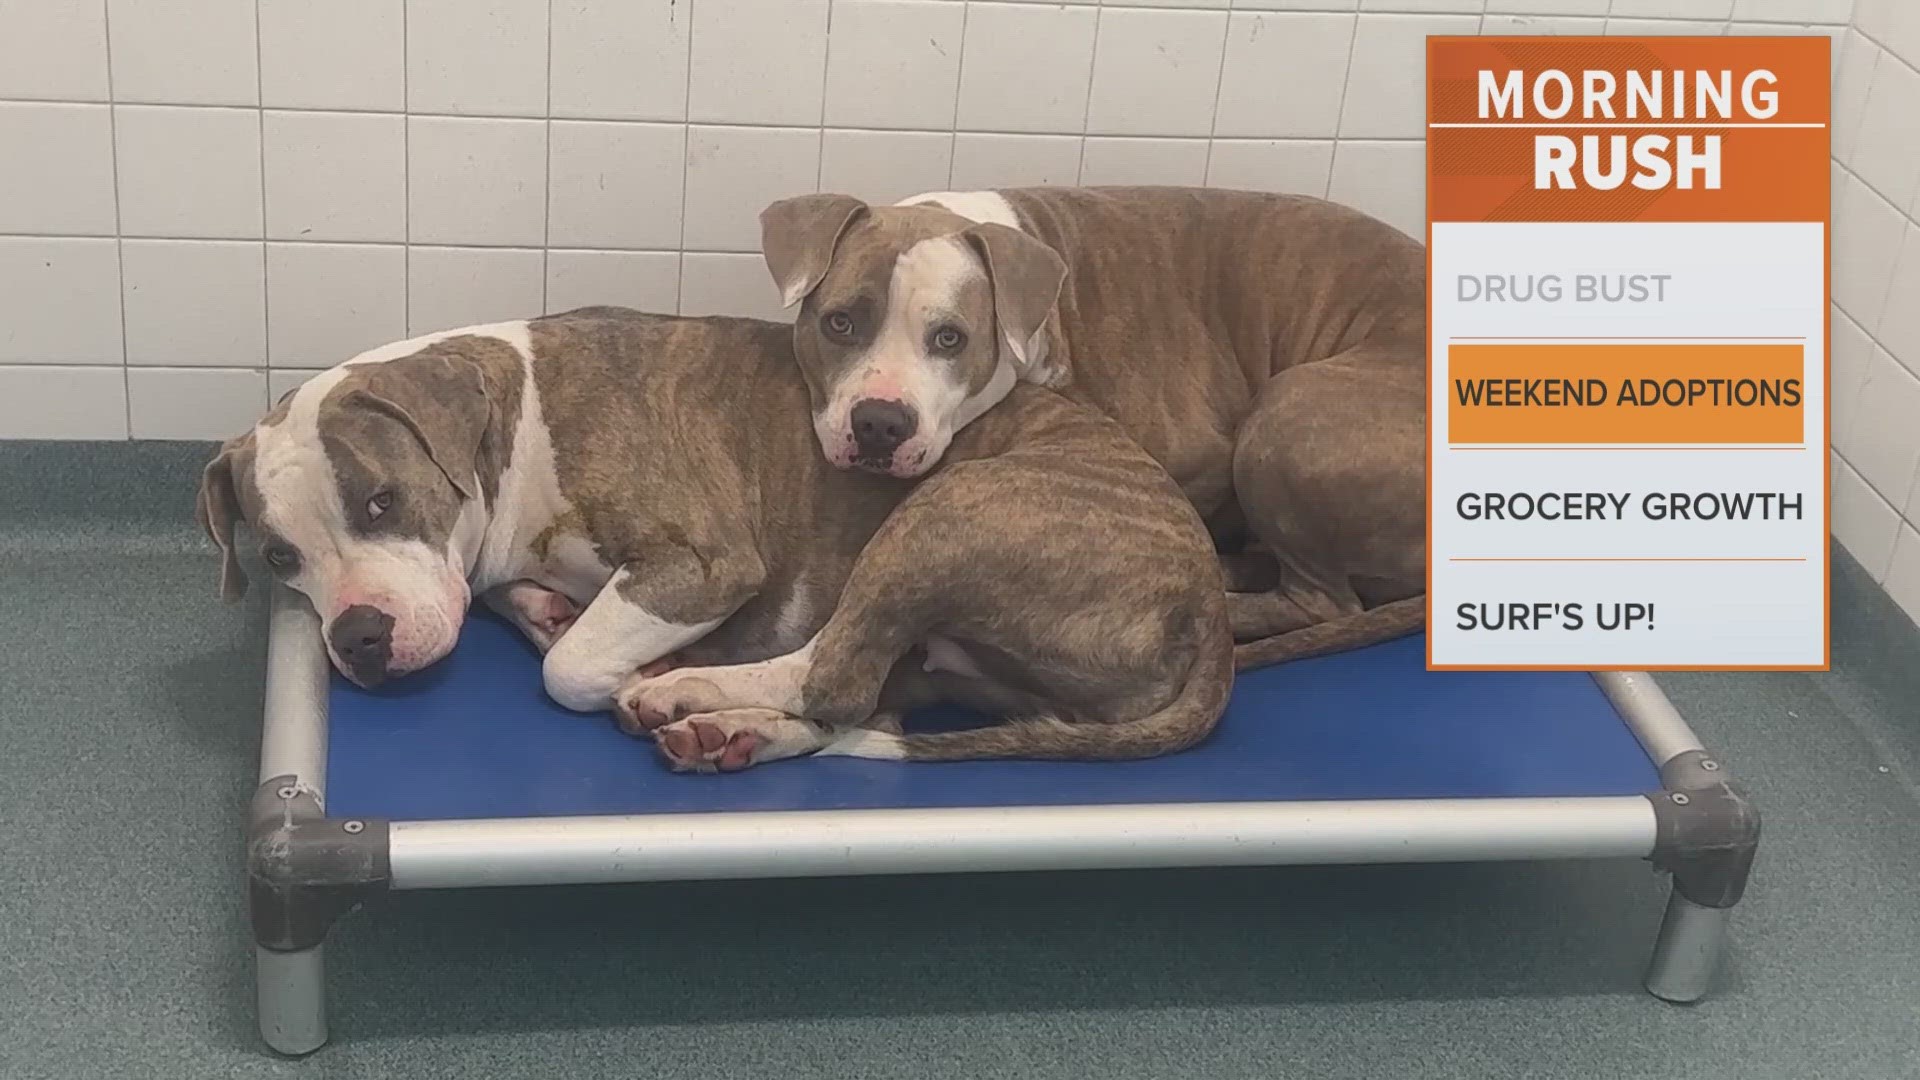 Dallas Animal Services says it's at 139% capacity for dogs.